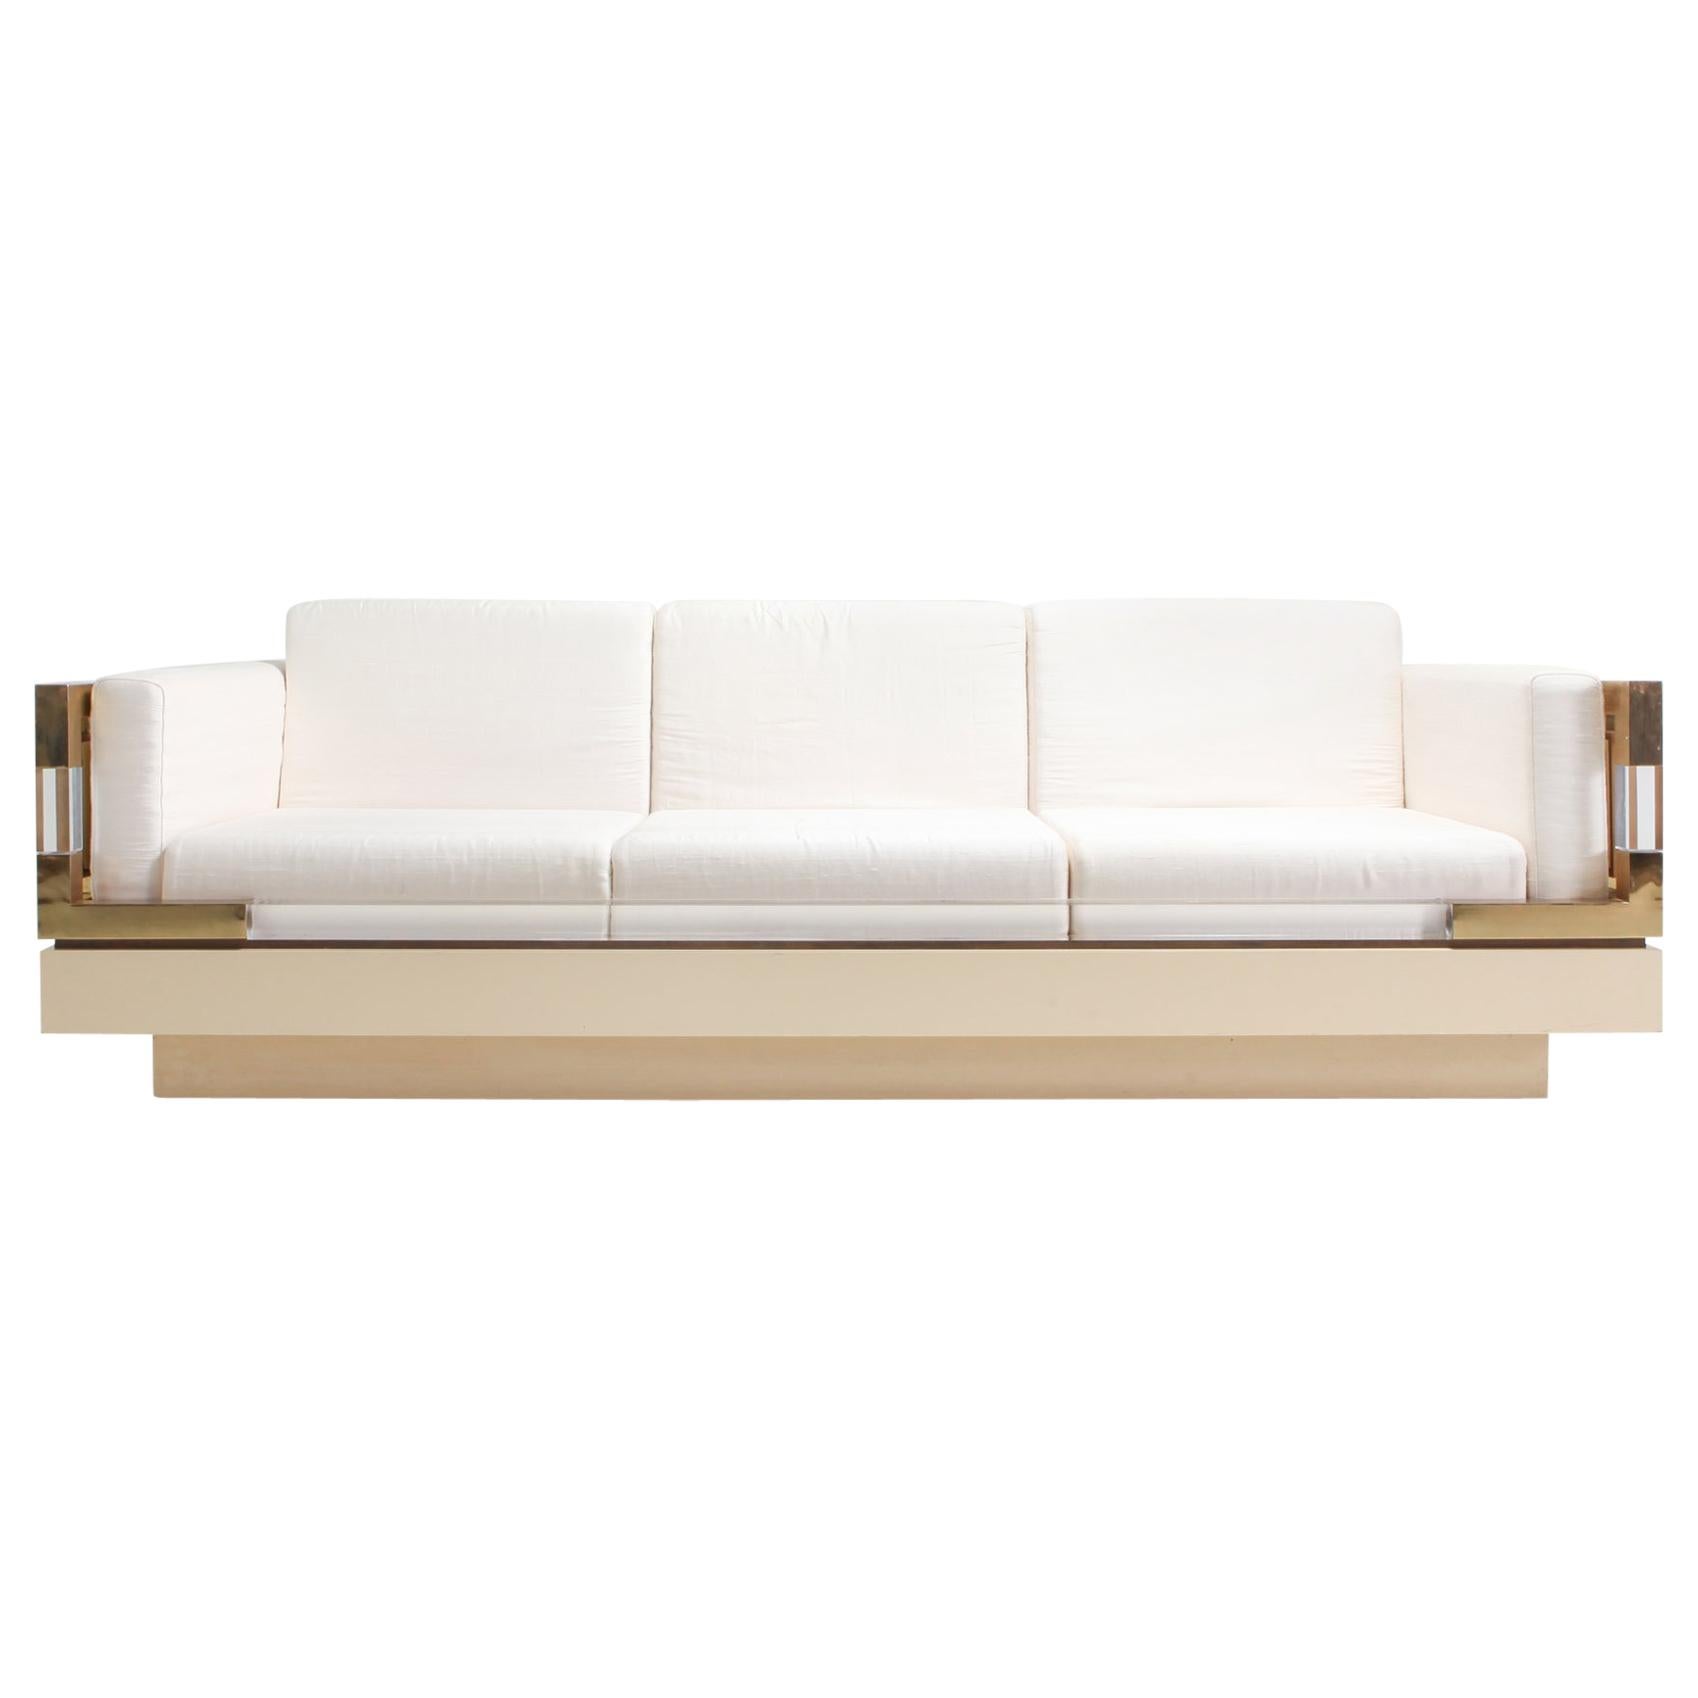 Hollywood Regency Couch in Cream Lacquer, Brass and Lucite, 1970s